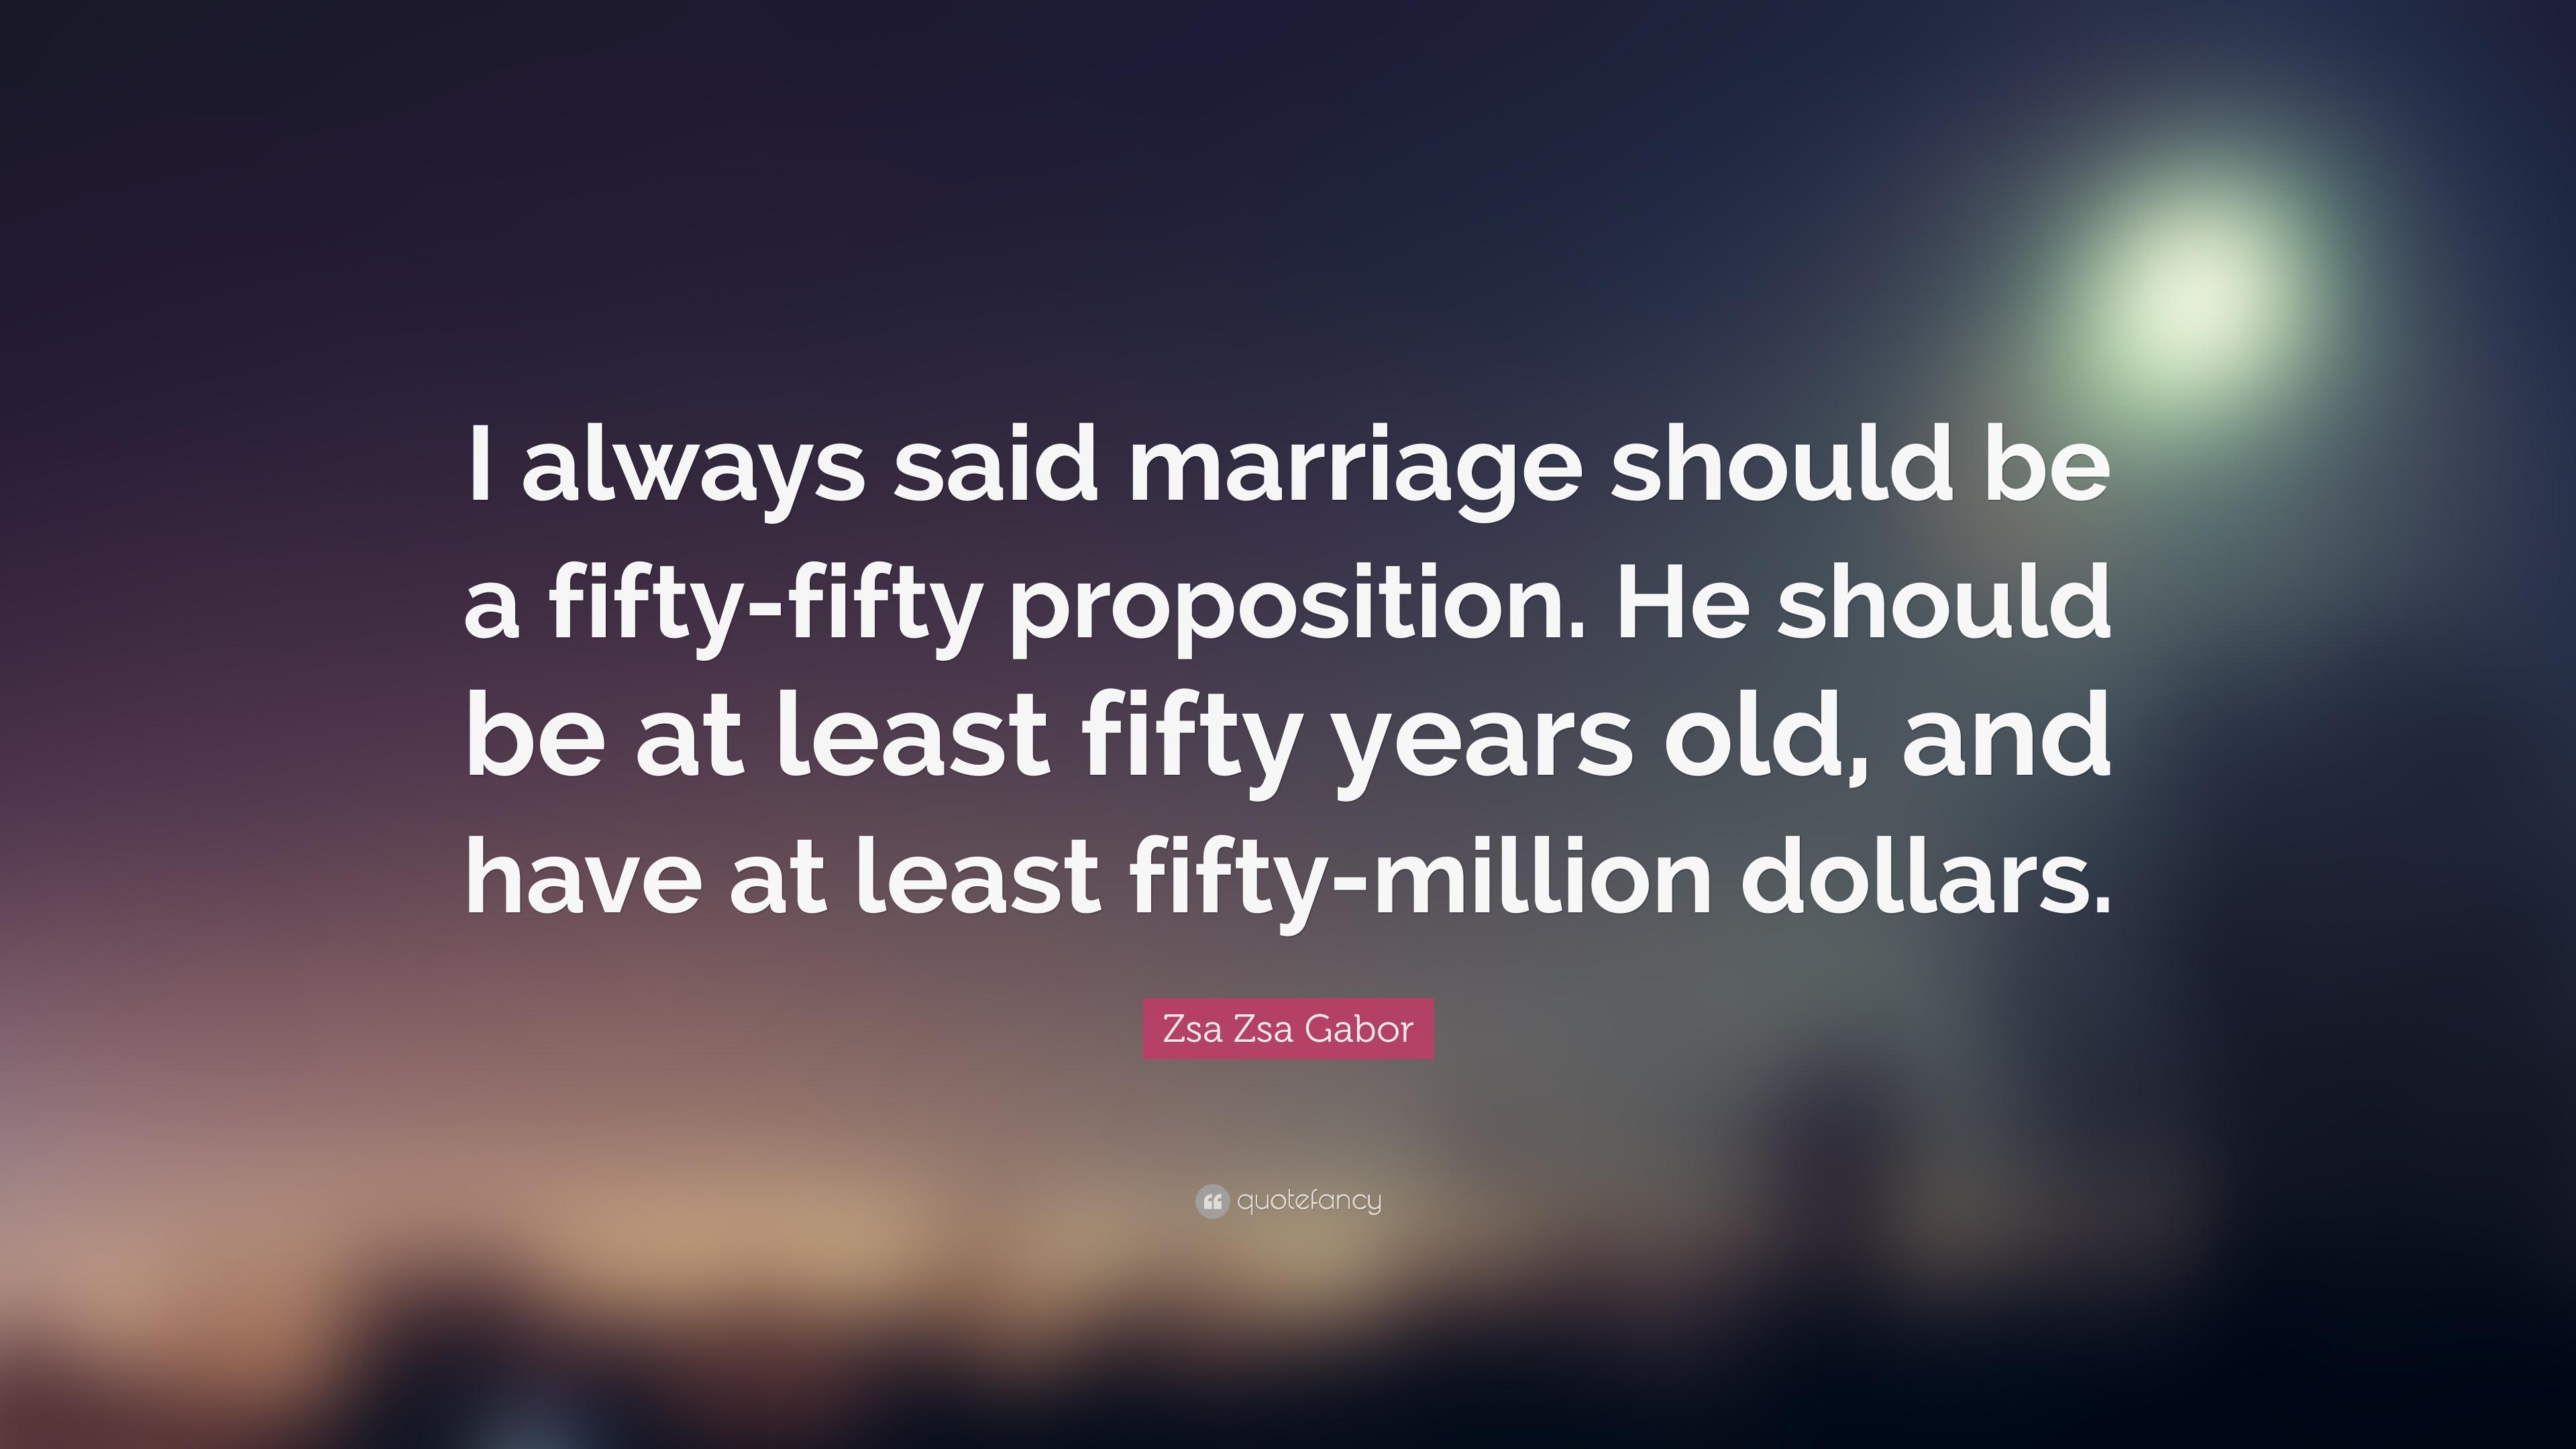 Zsa Zsa Gabor Quote: “I Always Said Marriage Should Be A Fifty Fifty